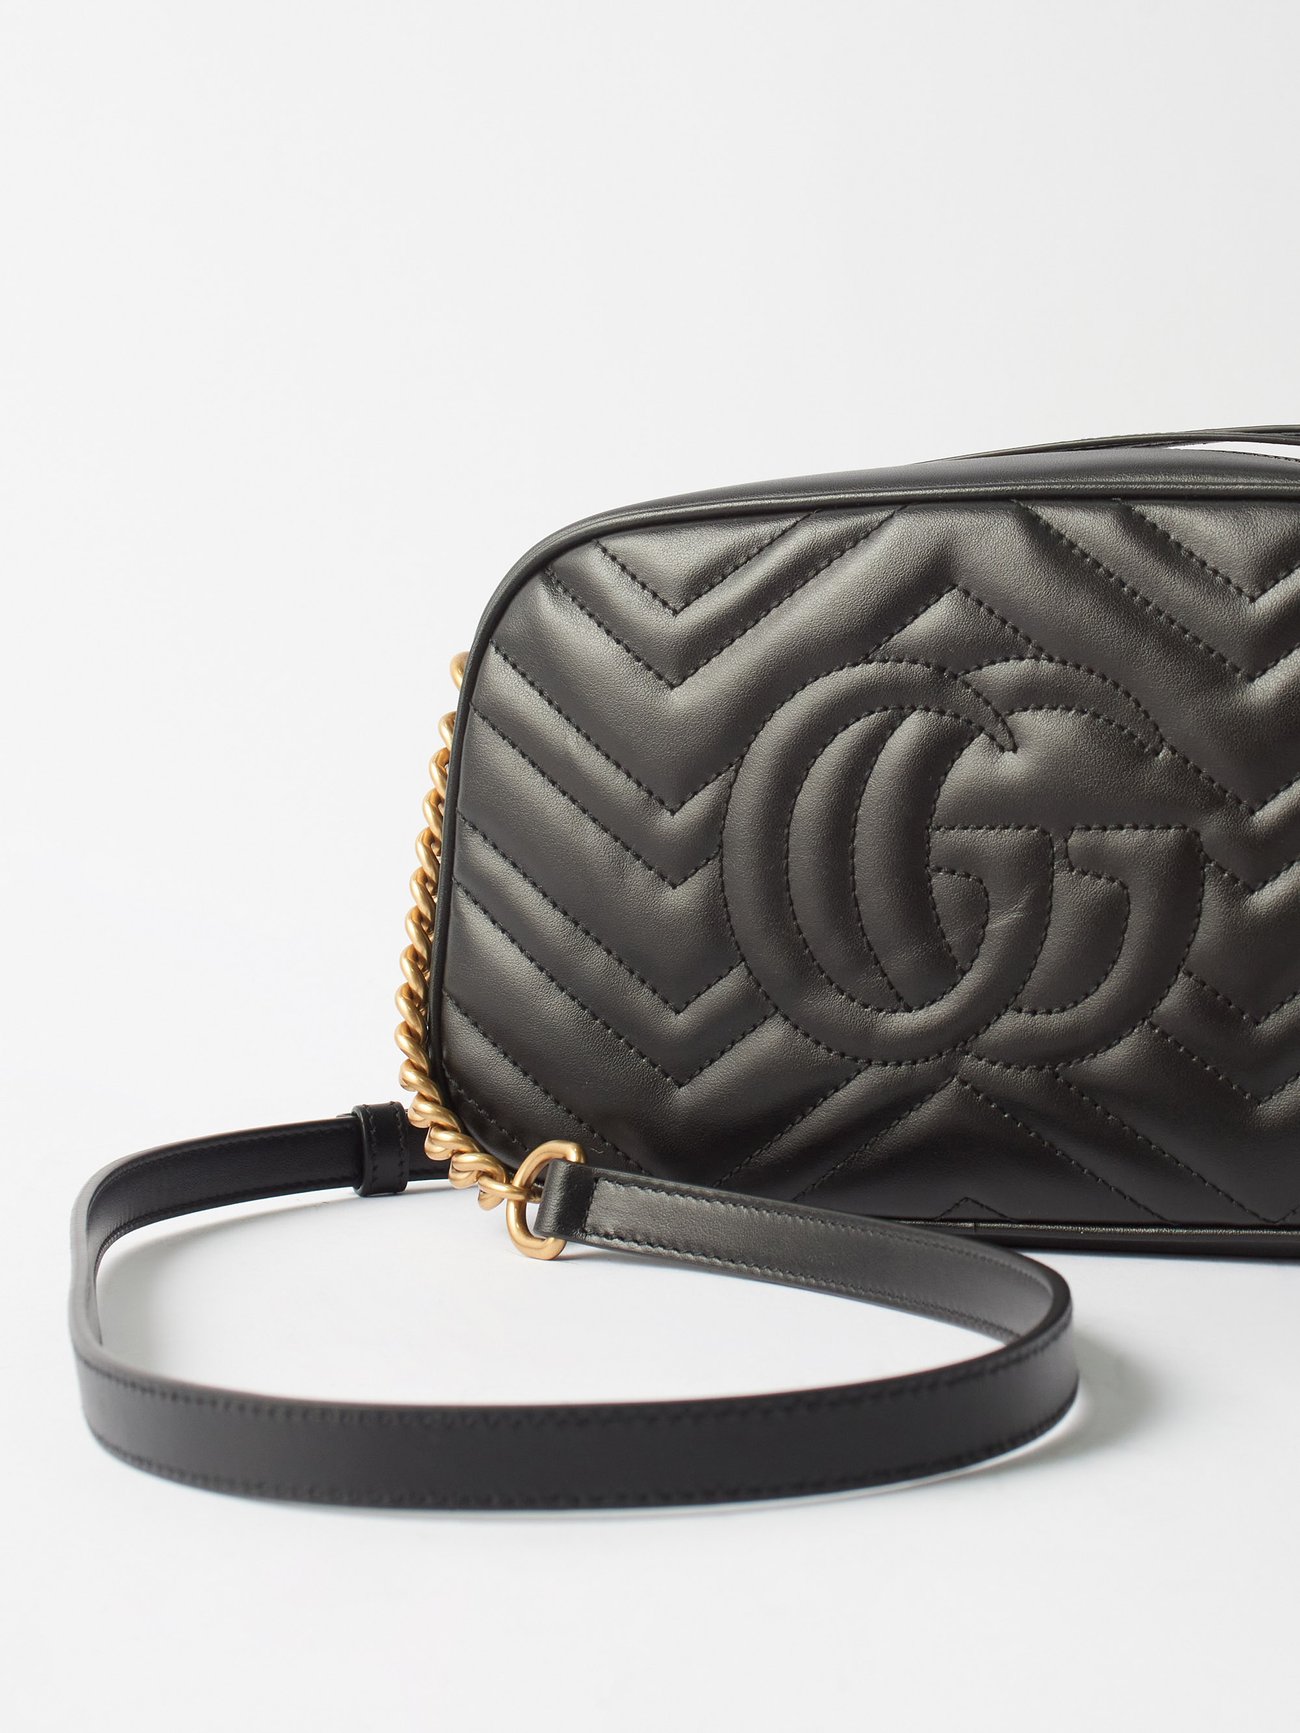 Gg marmont leather crossbody bag Gucci Black in Leather - 35606686